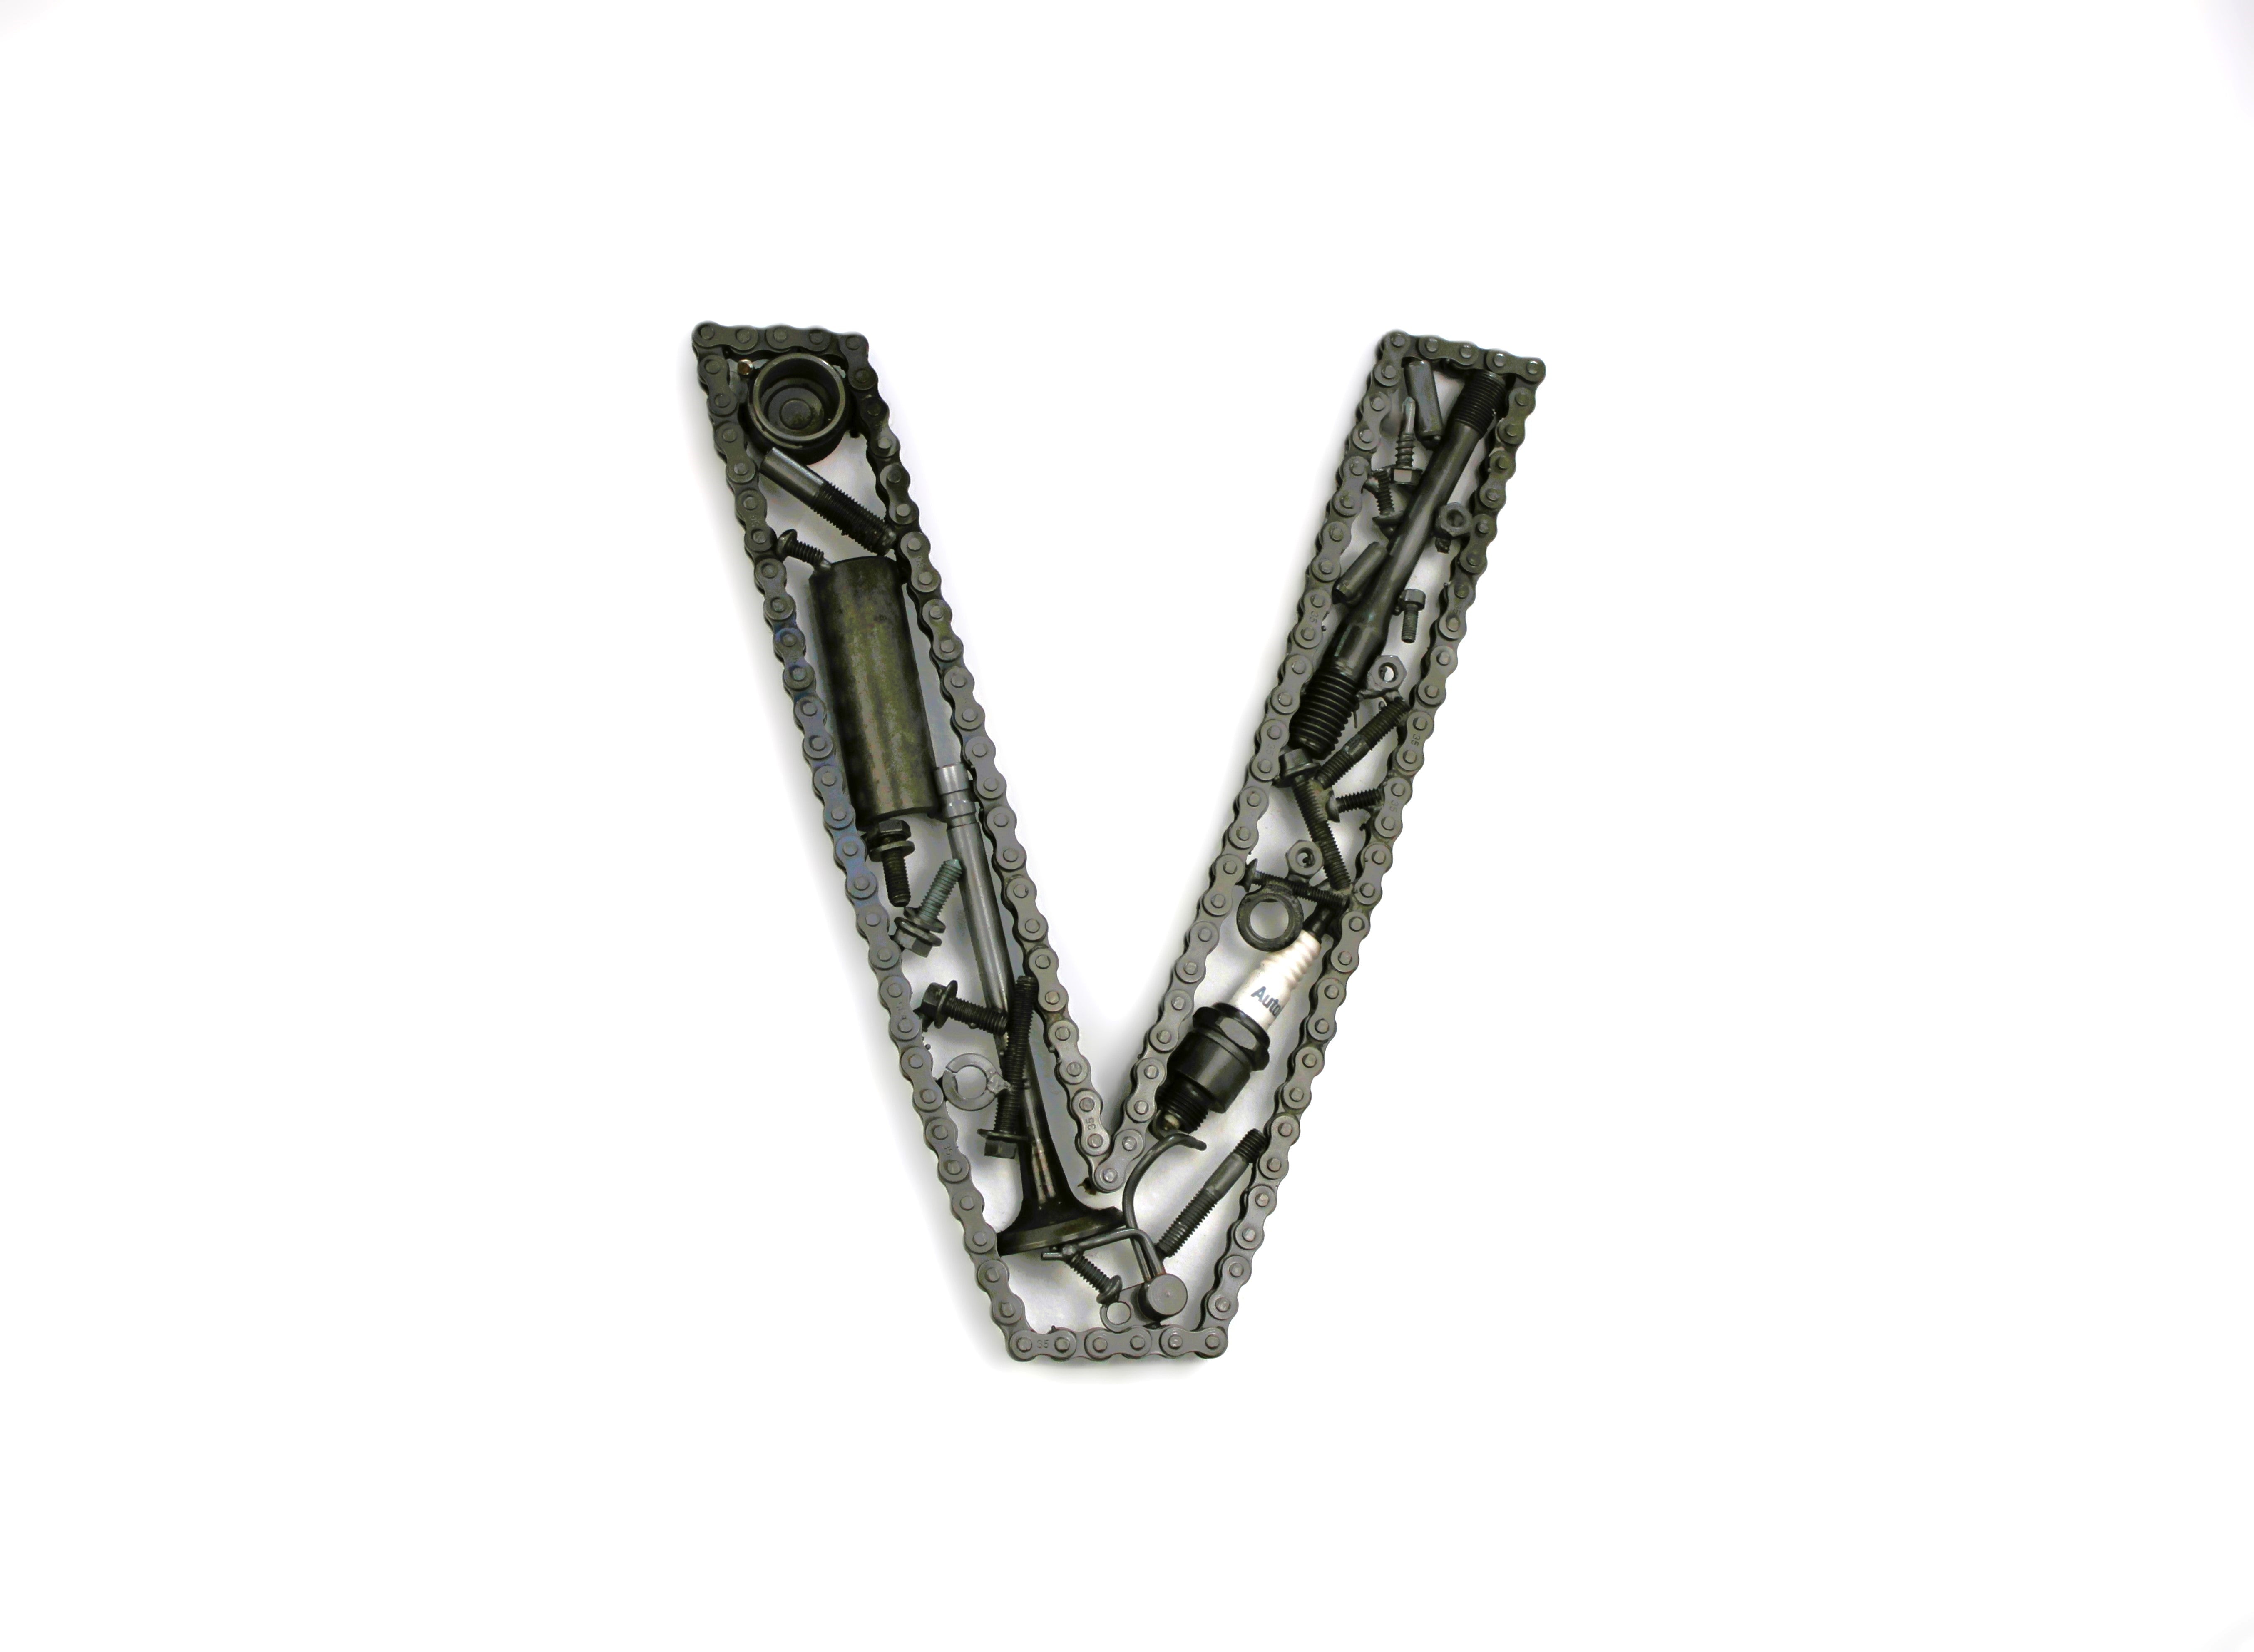 A letter V made out of real car parts, outlined with a timing chain.